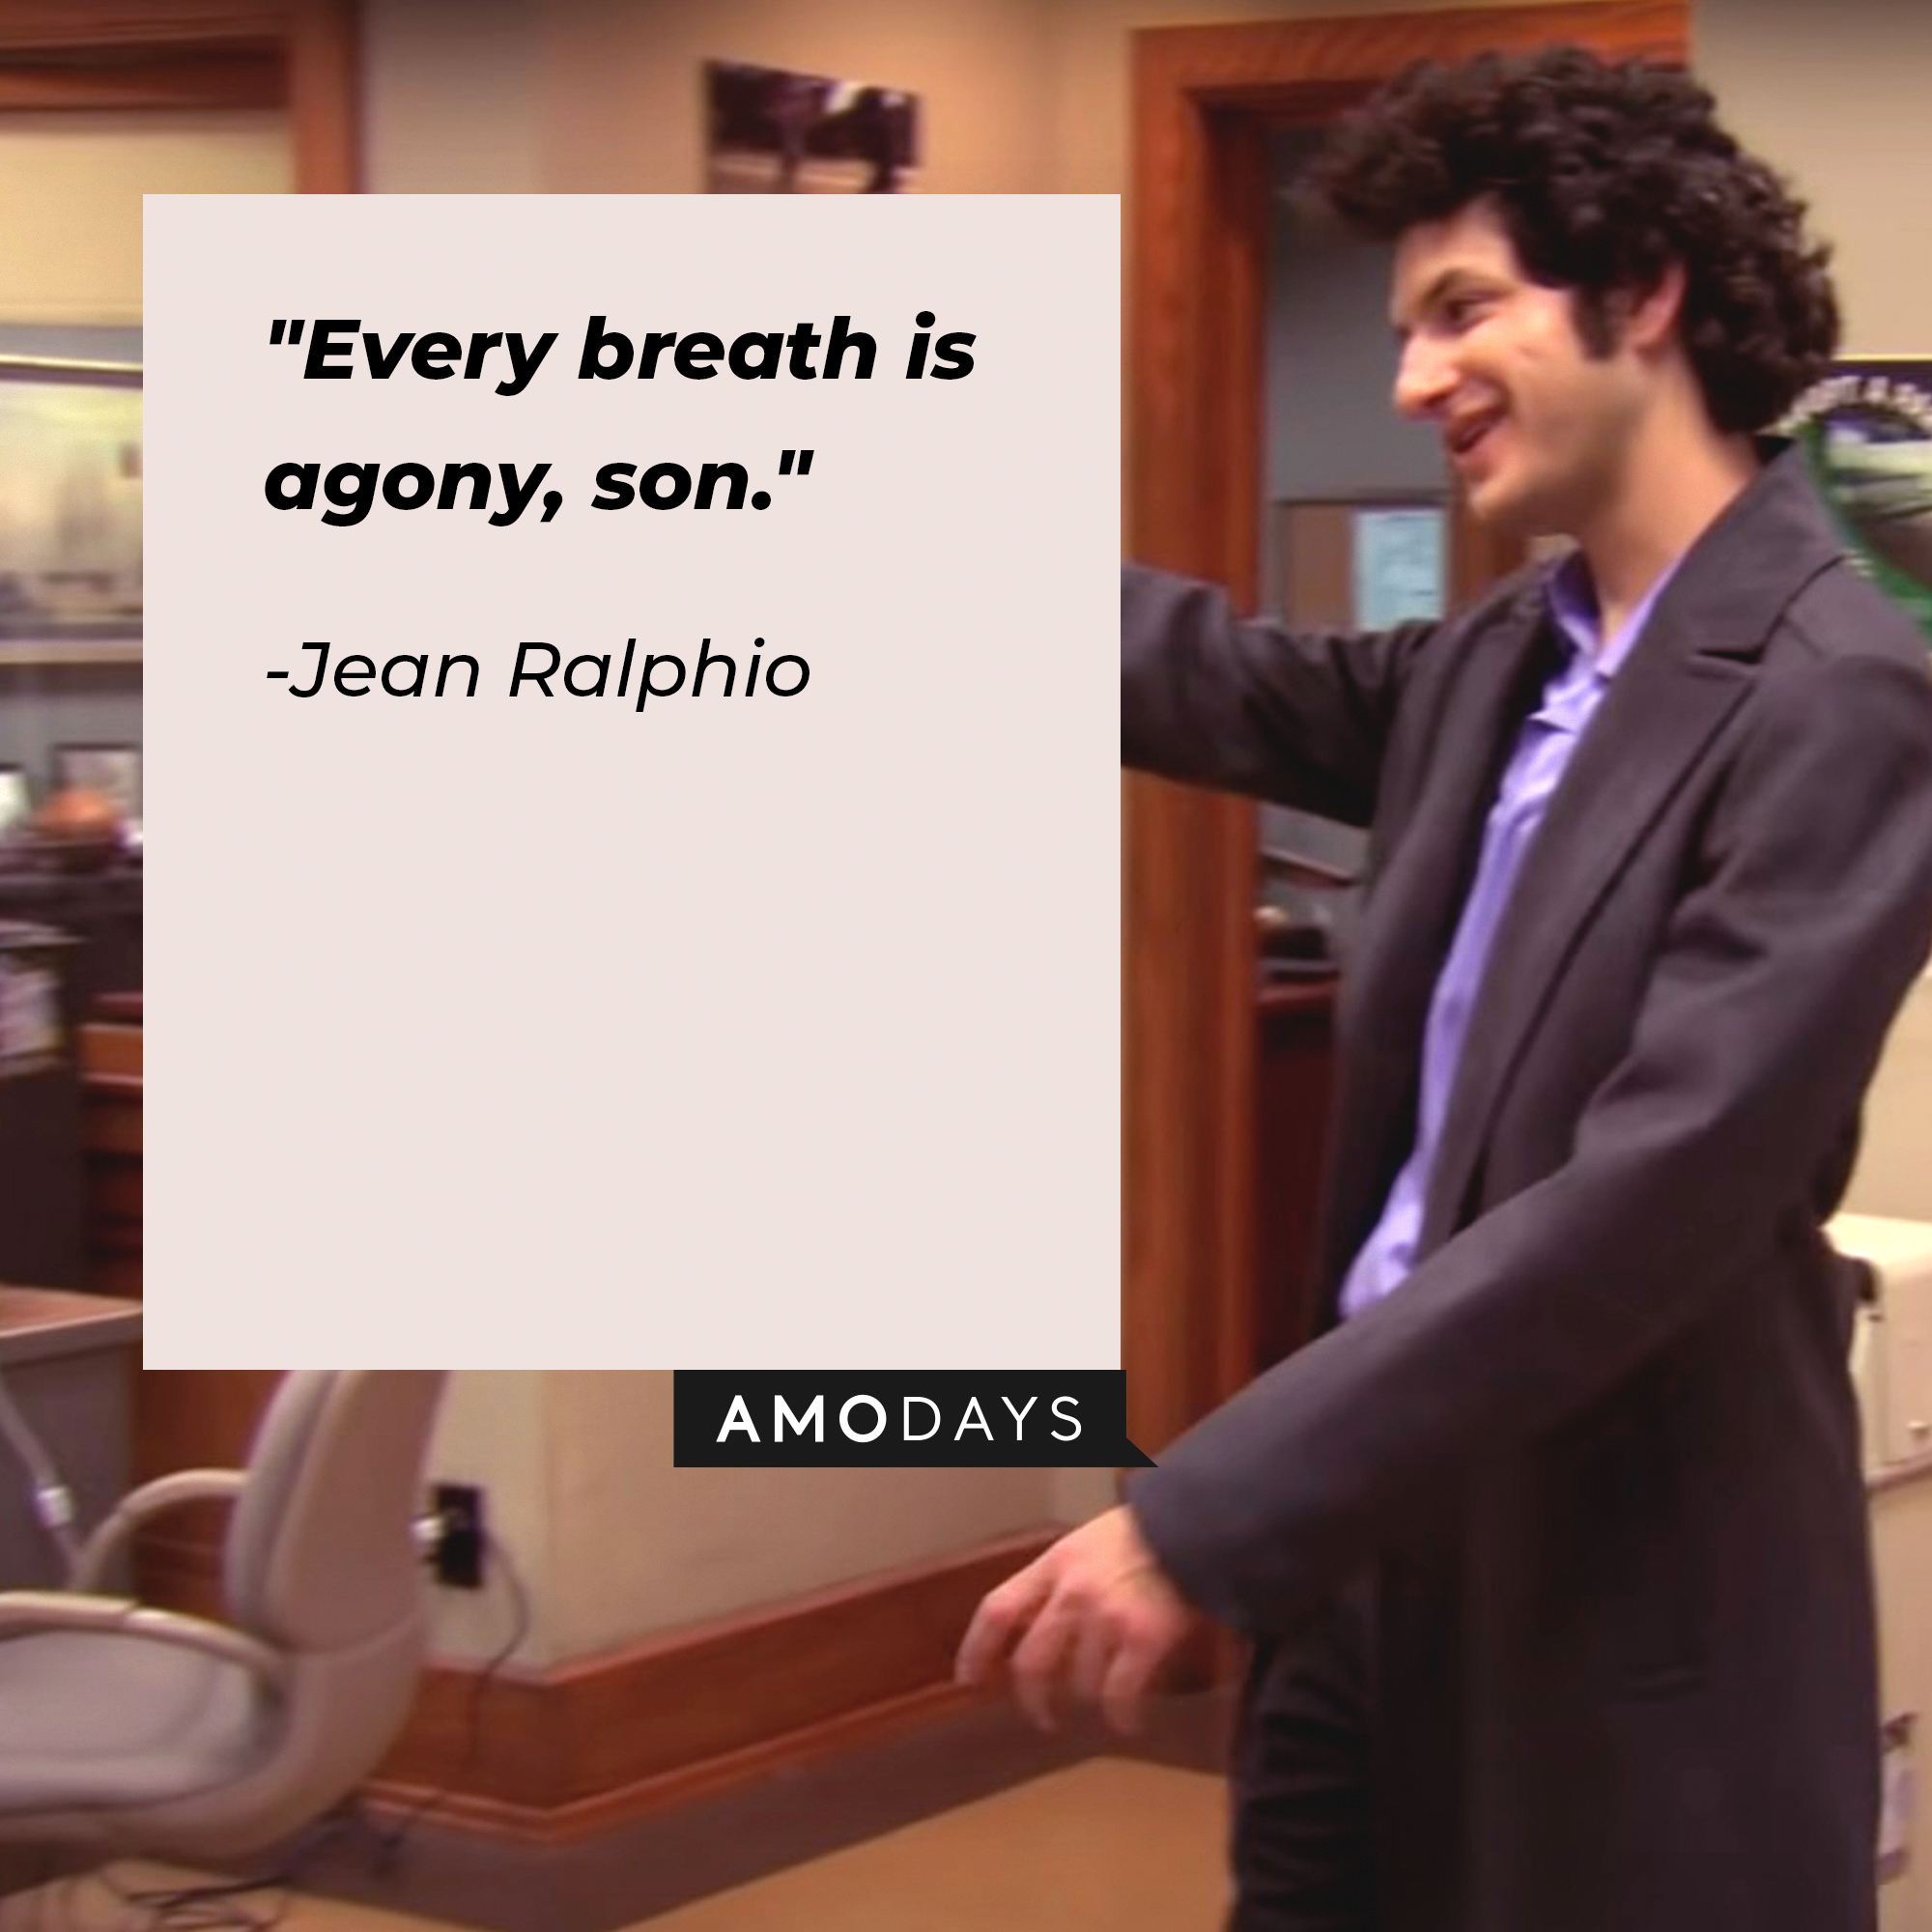 Jean Ralphio's quote: "Every breath is agony, son." | Source: Facebook.com/parksandrecreation